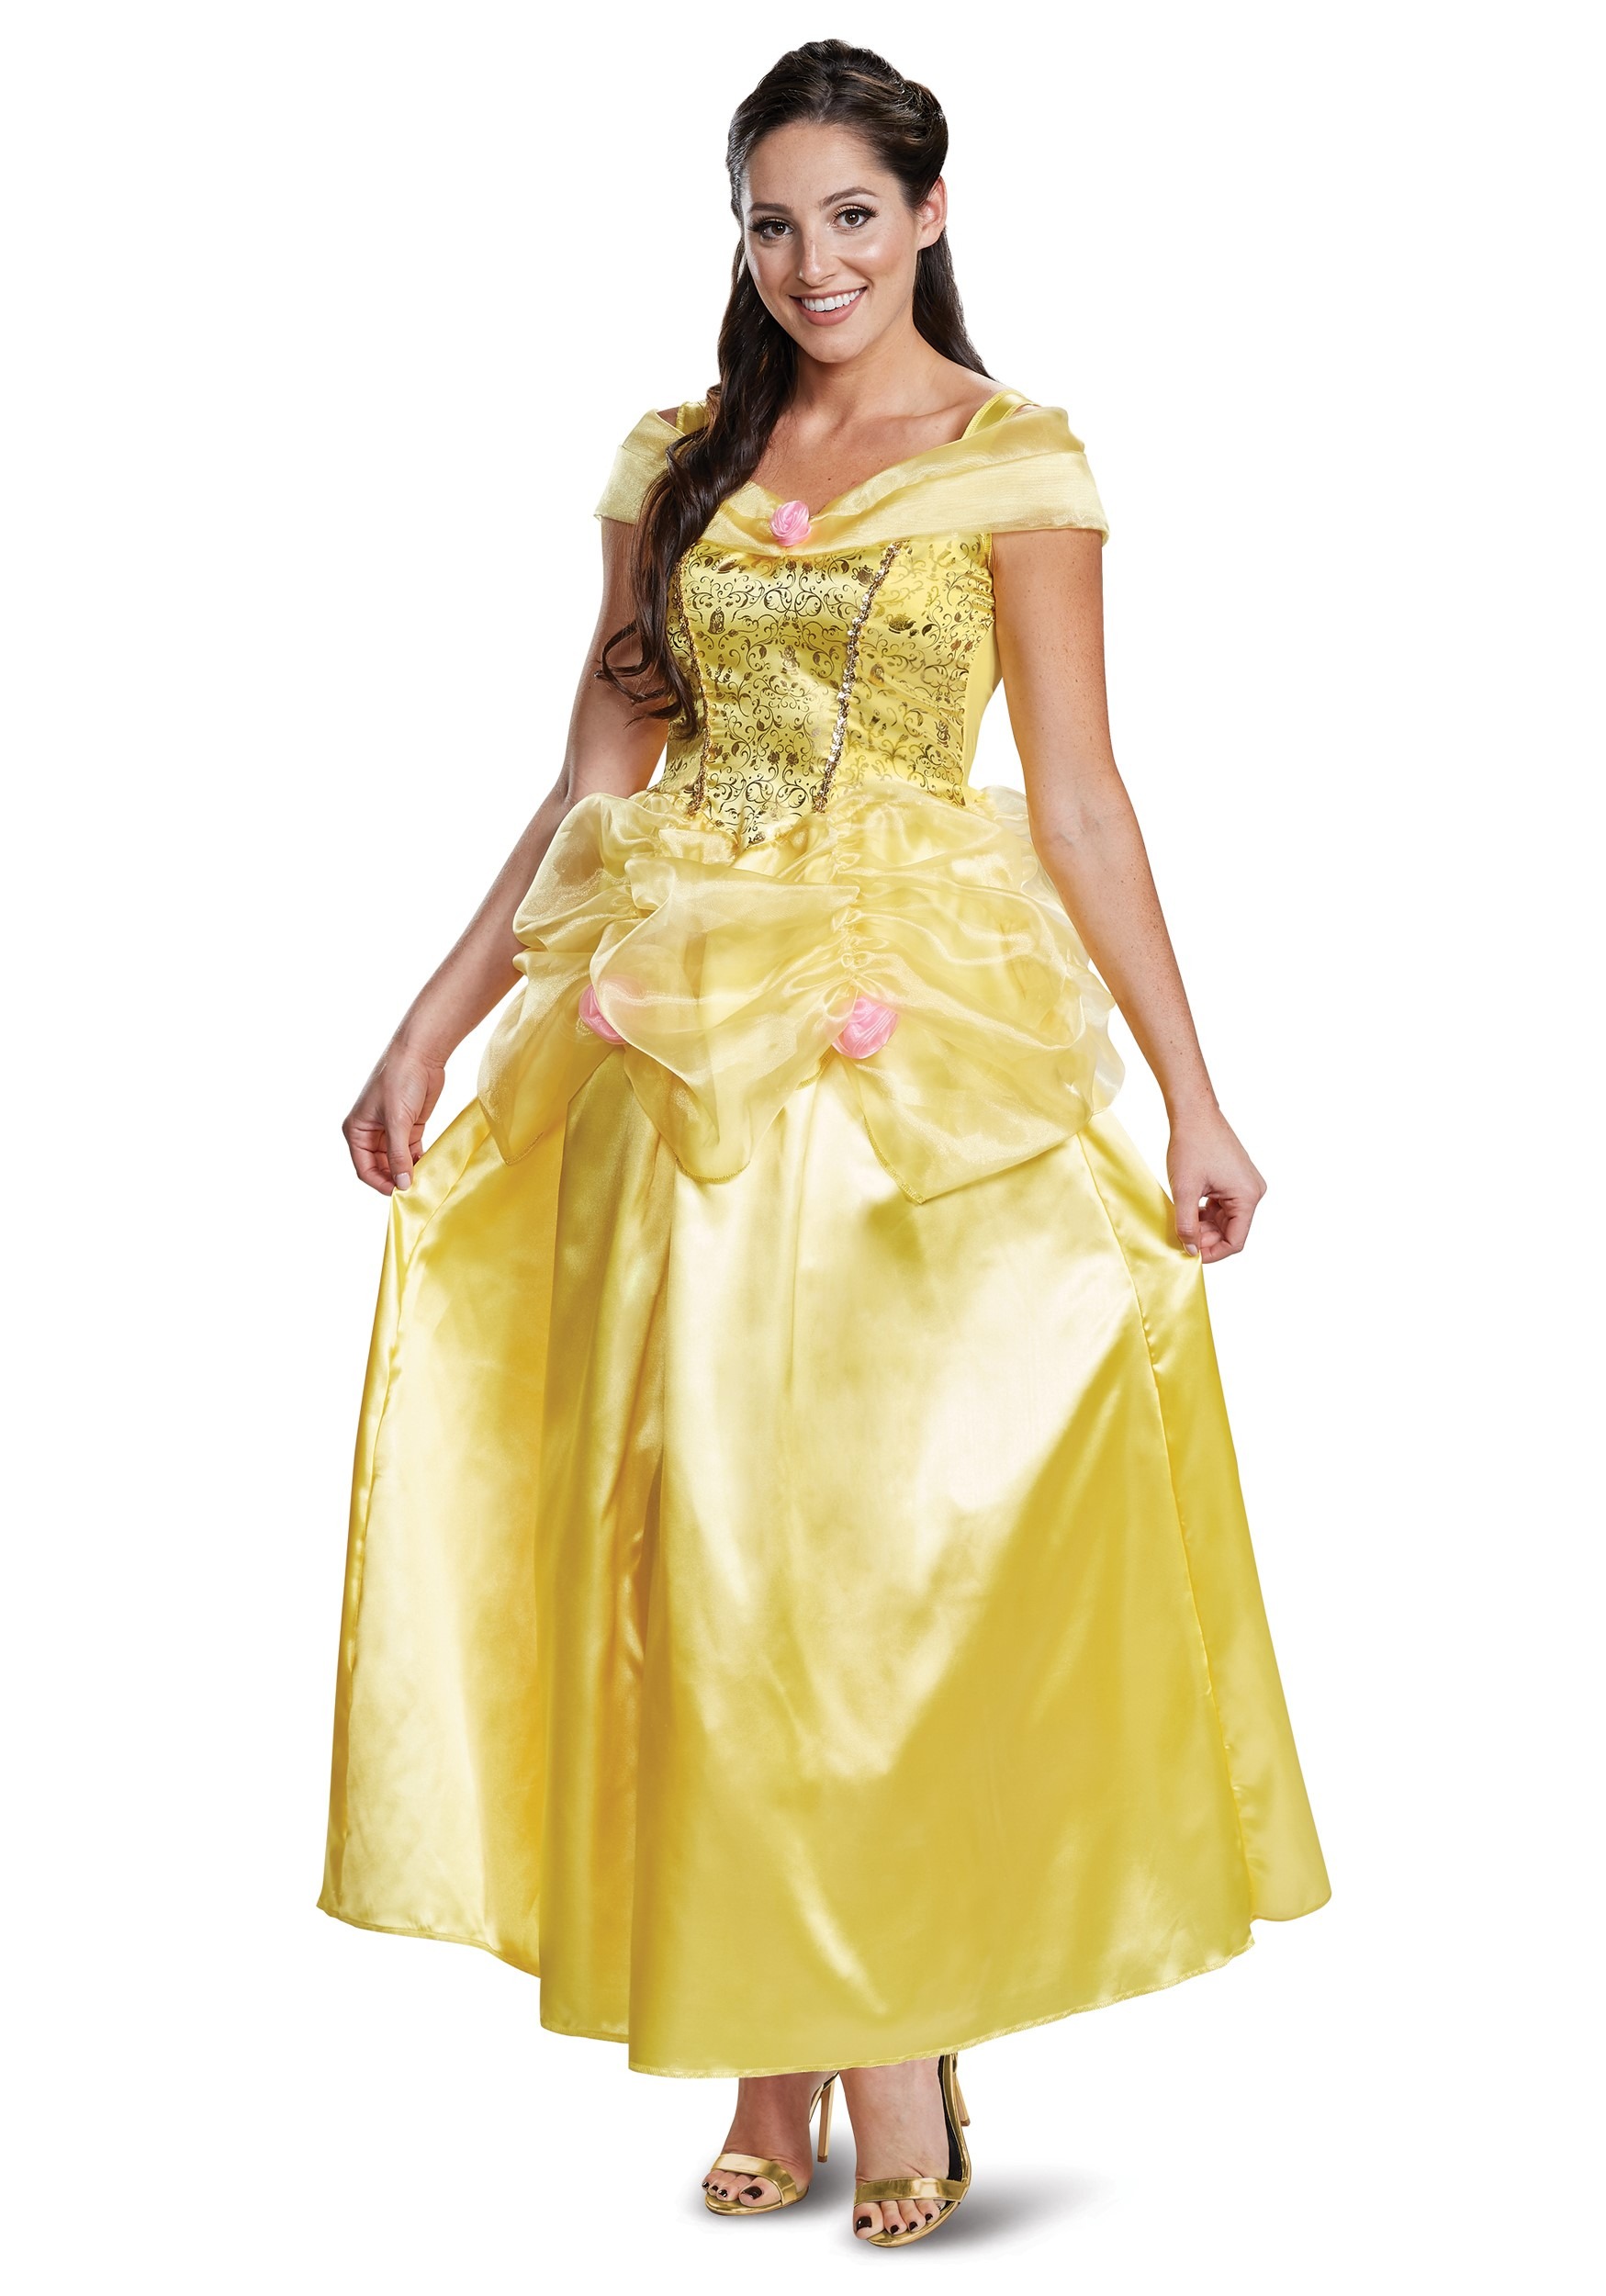 Image of Disney Belle Dress | The Beast Deluxe Classic Belle Costume ID DI67282-XL